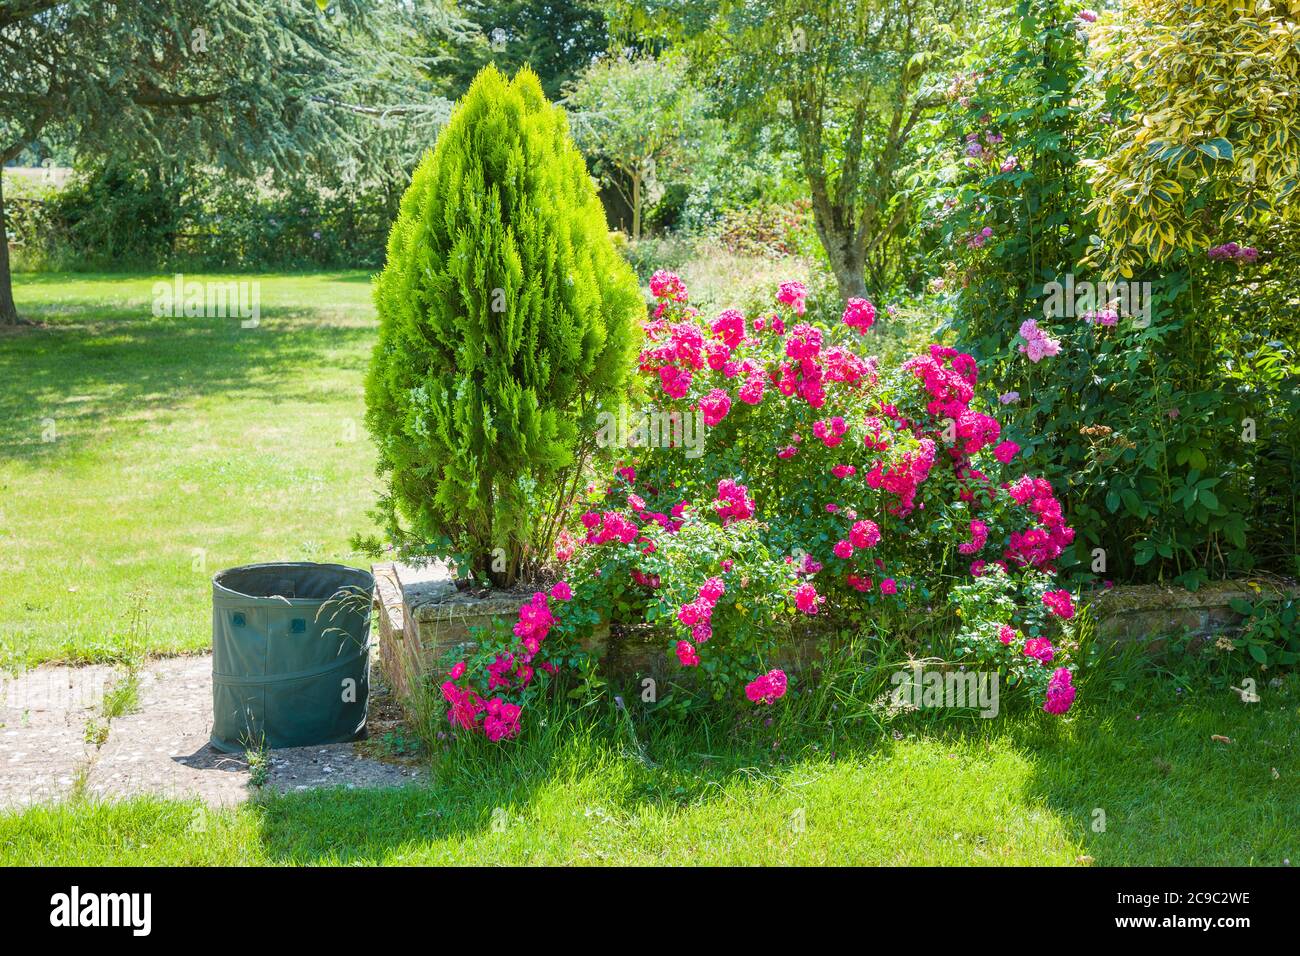 An English garden scene featuring a dwarf evergreen conifer, Rosa Pink Flower Carpet and the gardener's collapsable container for dead heads and weeds Stock Photo